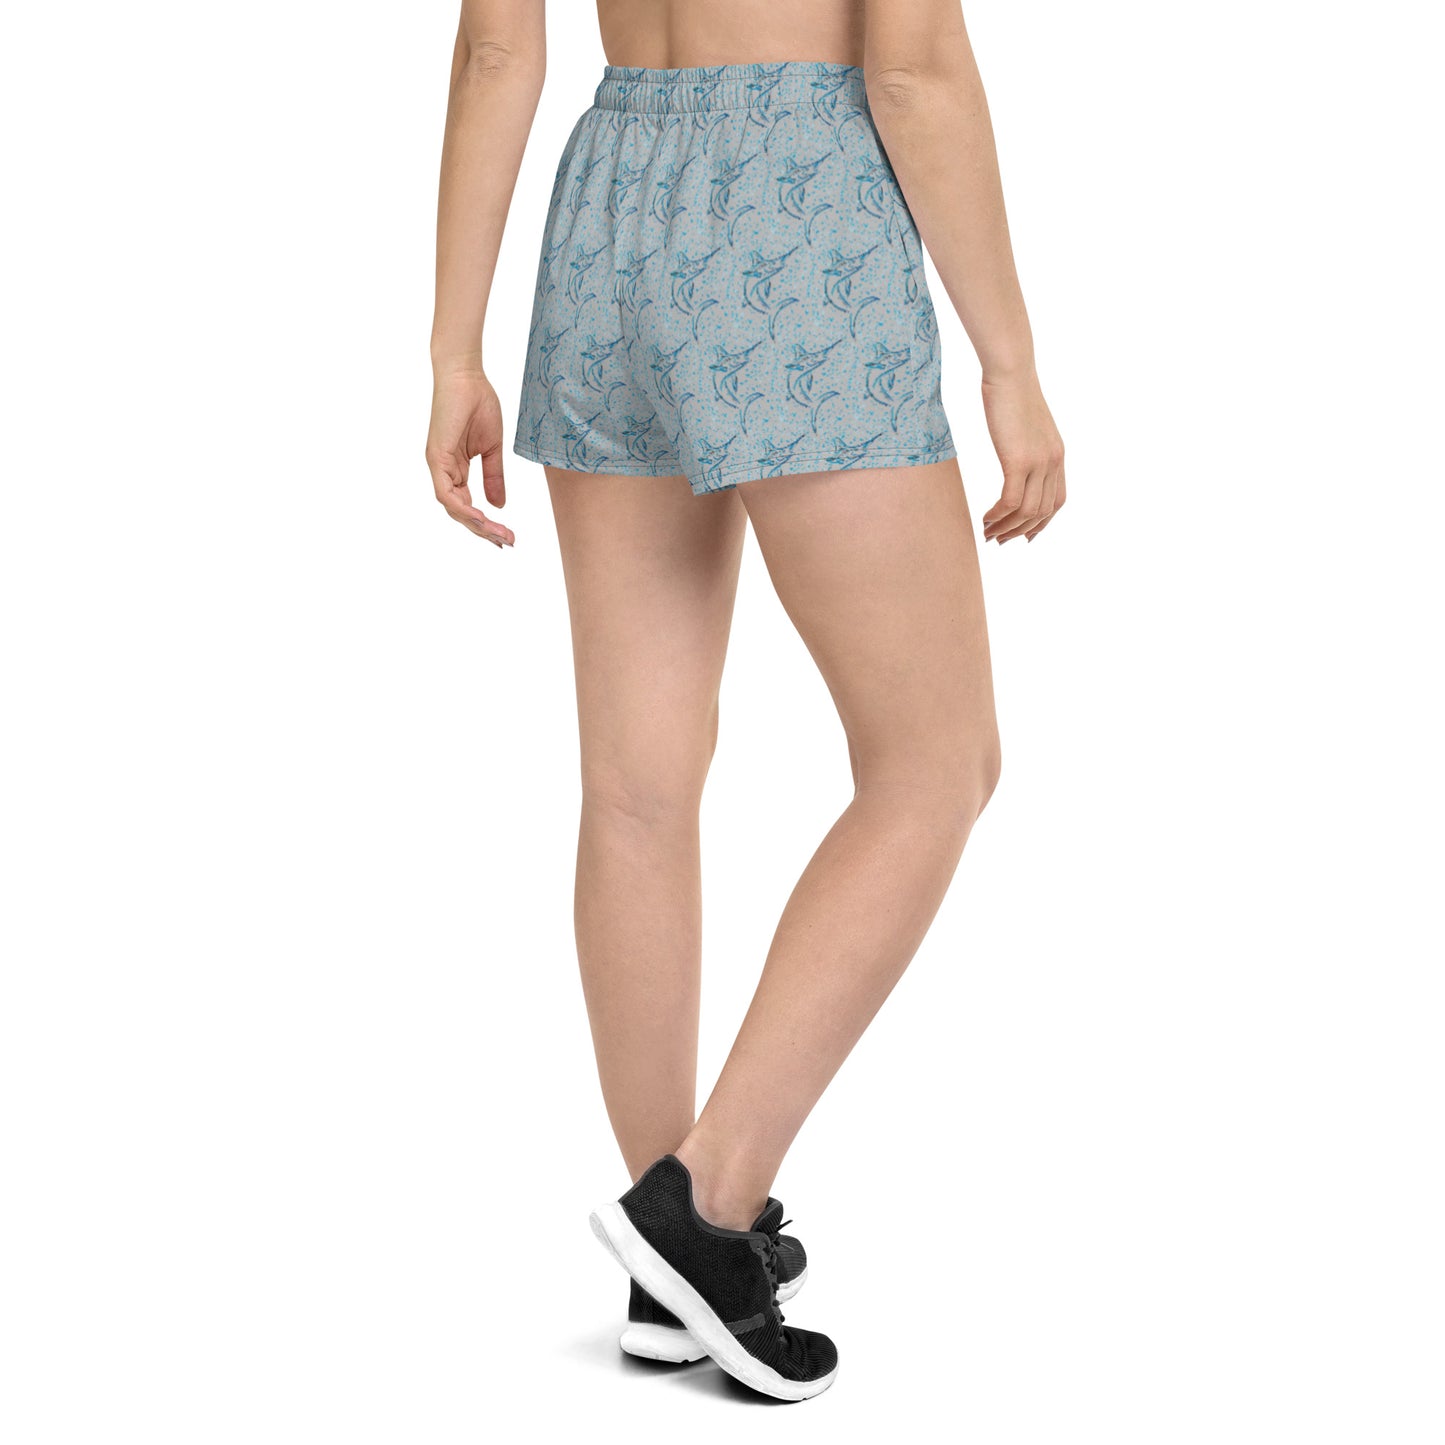 Marlin sketch pattern Women’s Recycled Athletic Shorts